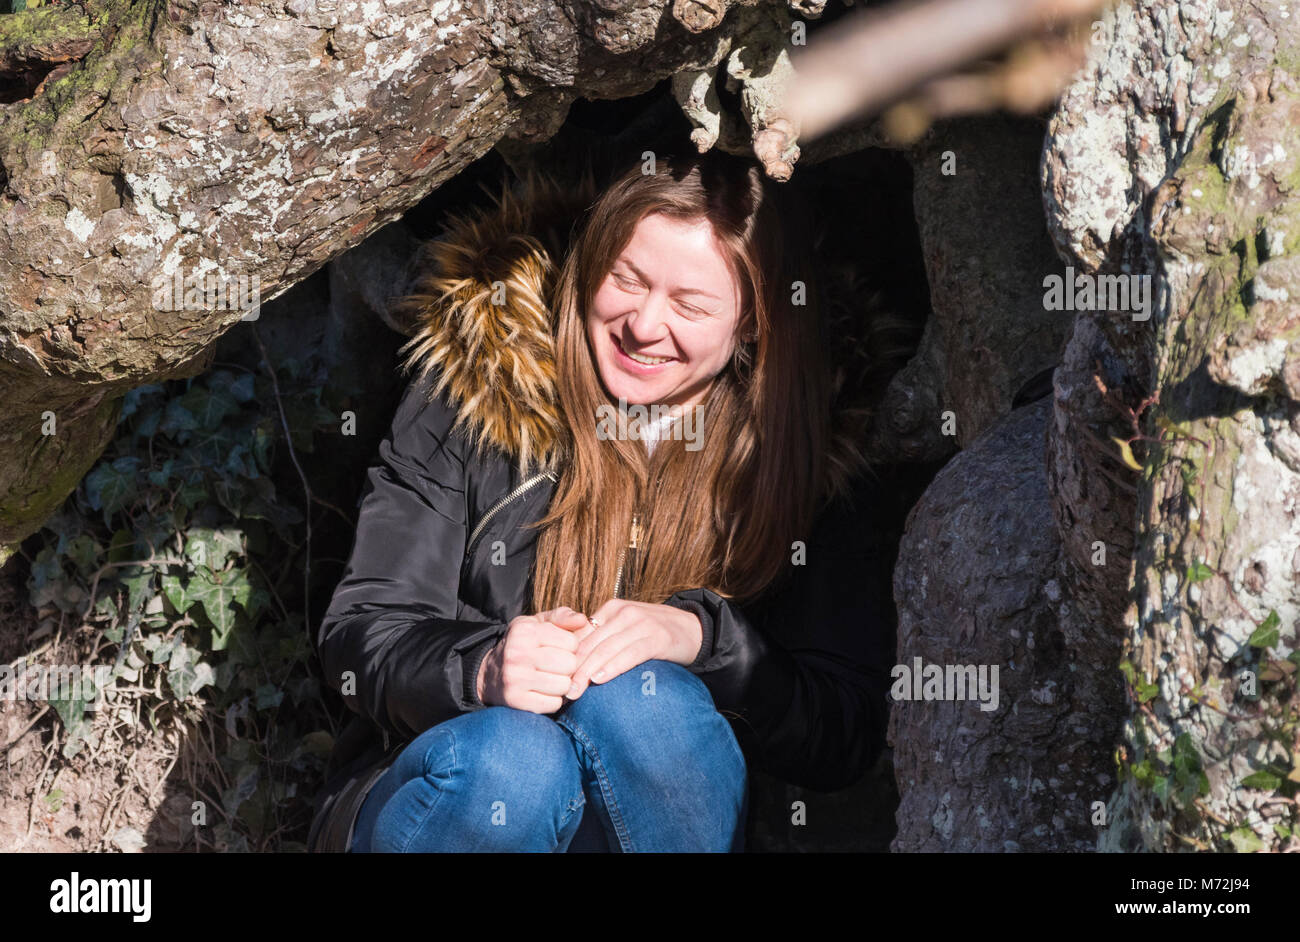 Pretty young woman sitting outside under a tree wearing a coat, on a cold Winter day with sun shining on her face. Stock Photo